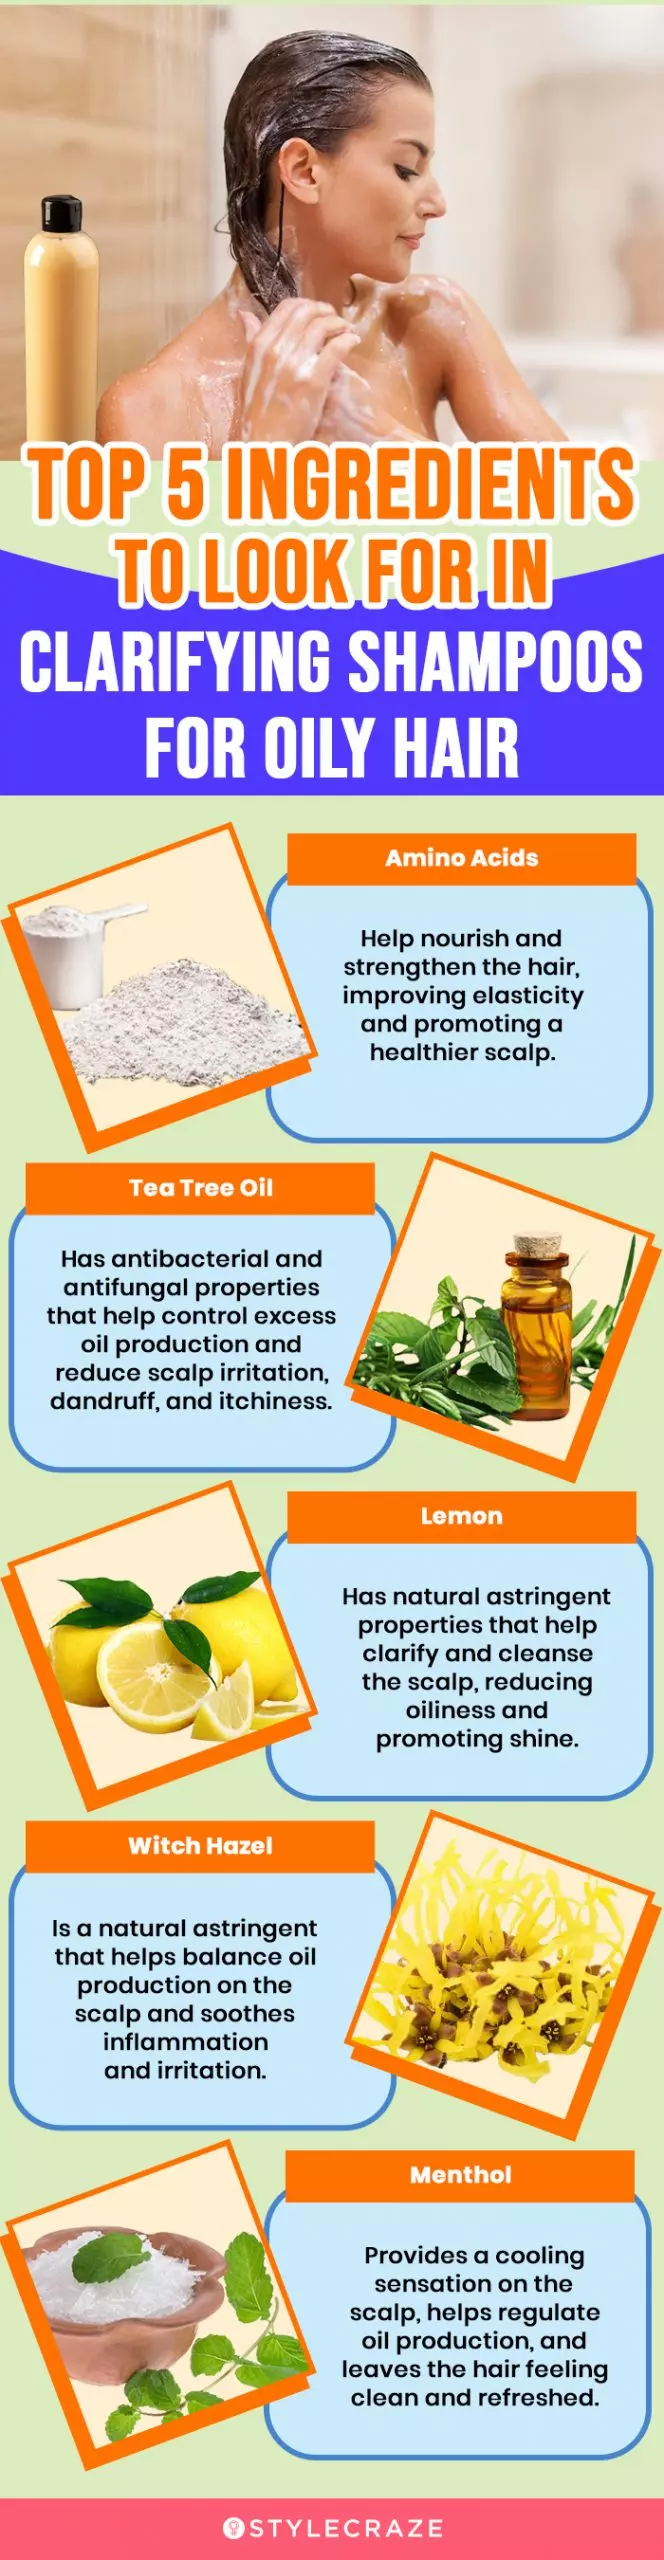 Top 5 Ingredients To Look For In Clarifying Shampoos For Oily Hair (infographic)